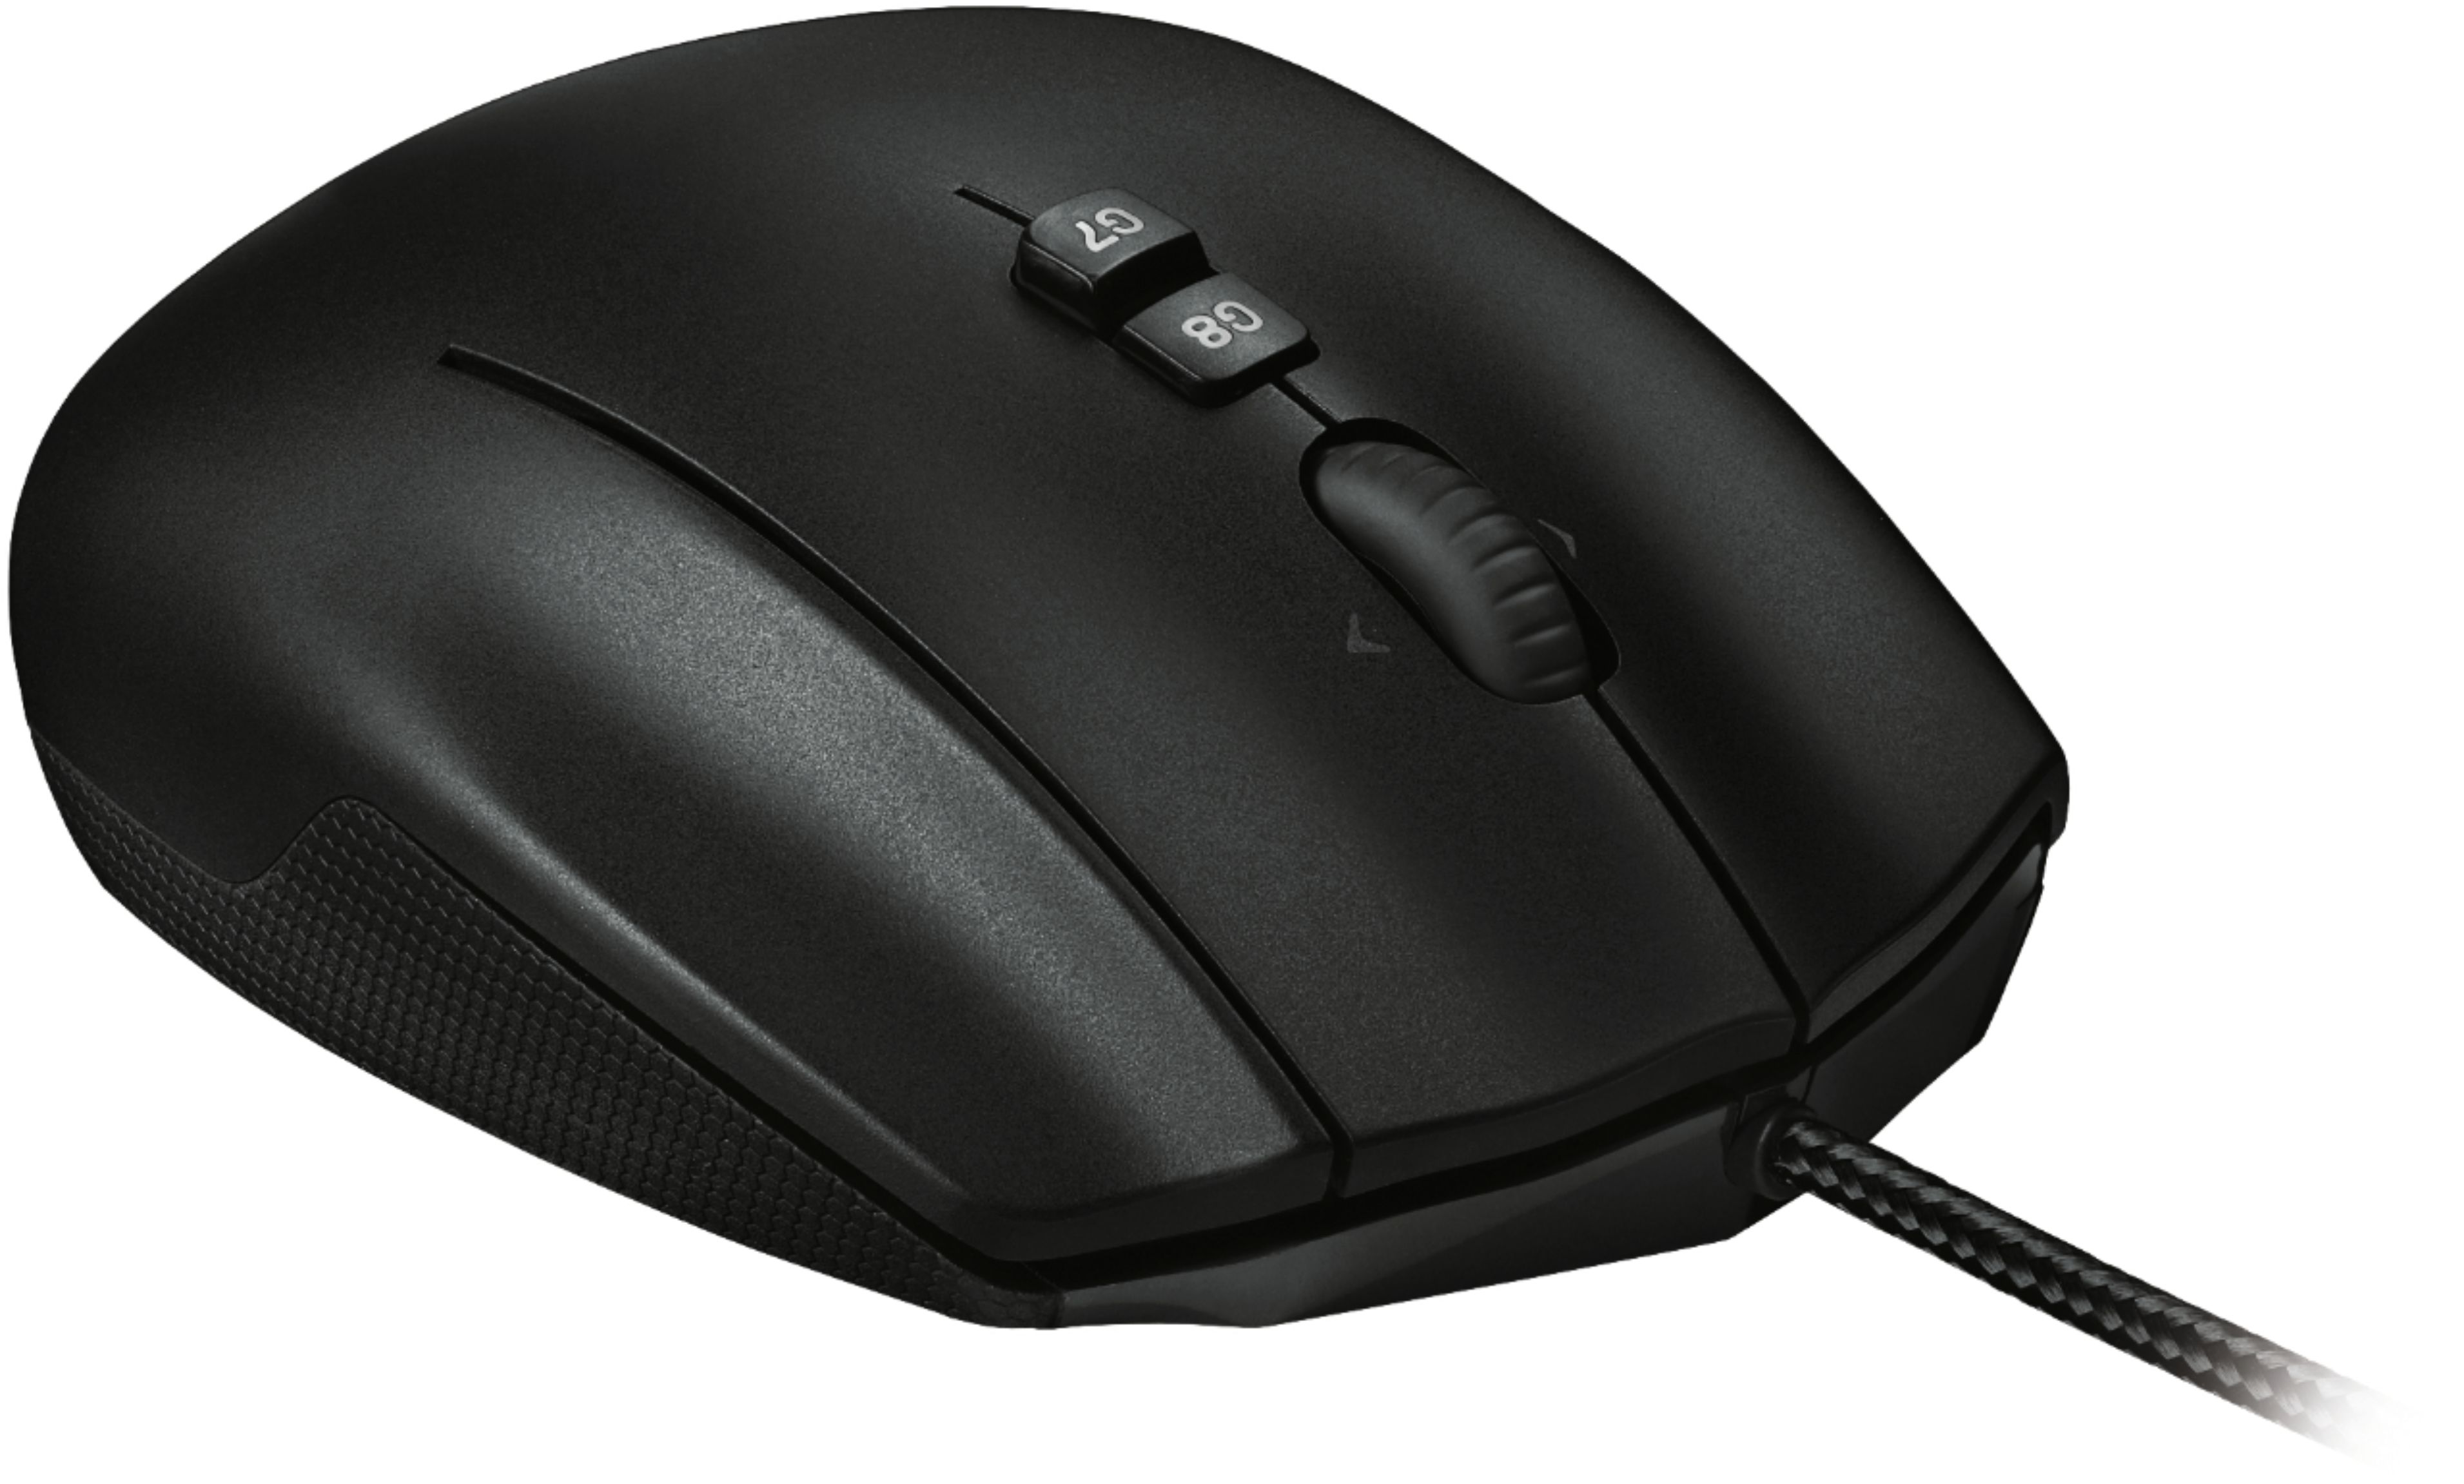 snyde firkant Lao Logitech G600 MMO Wired Optical Gaming Mouse Black 910-002864 - Best Buy